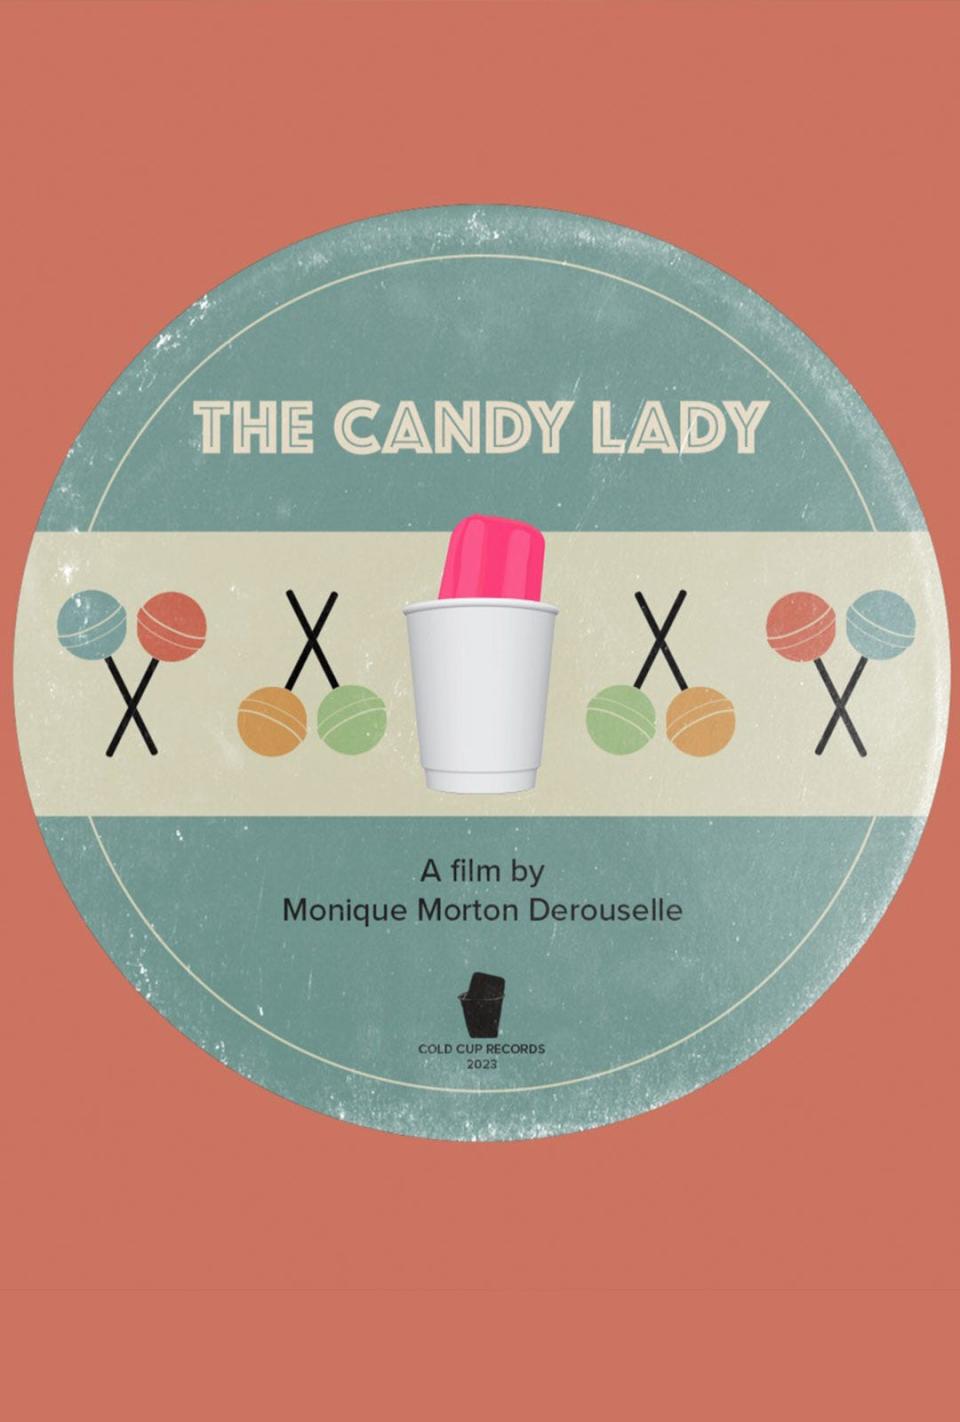 "The Candy Lady" by Monique Morton Derouselle is one of 20 films headed to the 2023 Film Prize Oct. 19 - 21 in Shreveport.